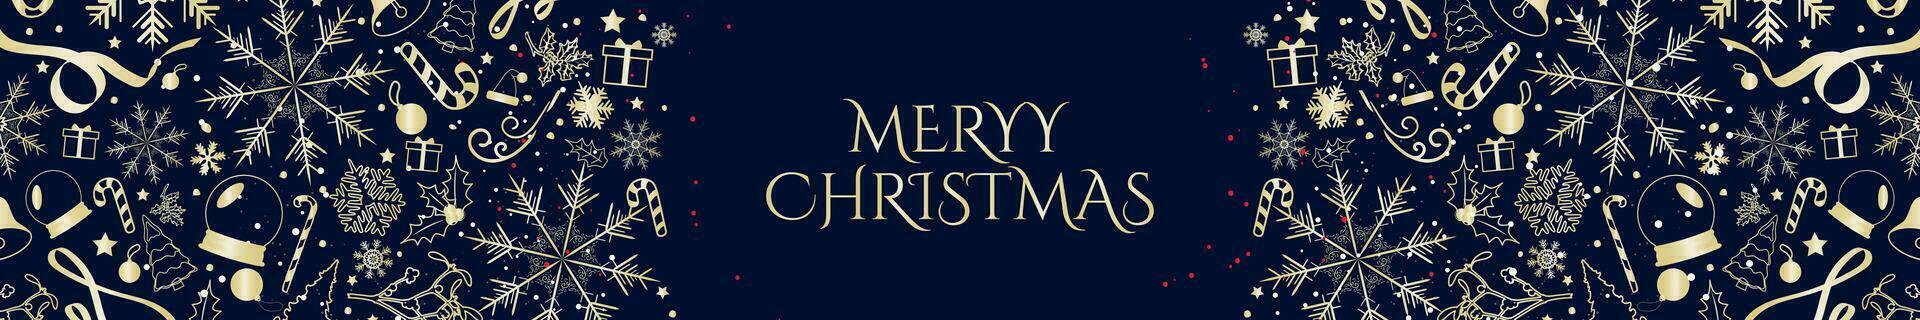 Golden Christmas Header Template on blue background. Decorative and elegant Christmas Horizontal Banner with gold xmas designs and icons. Merry Christmas. Vector Illustration. EPS 10.